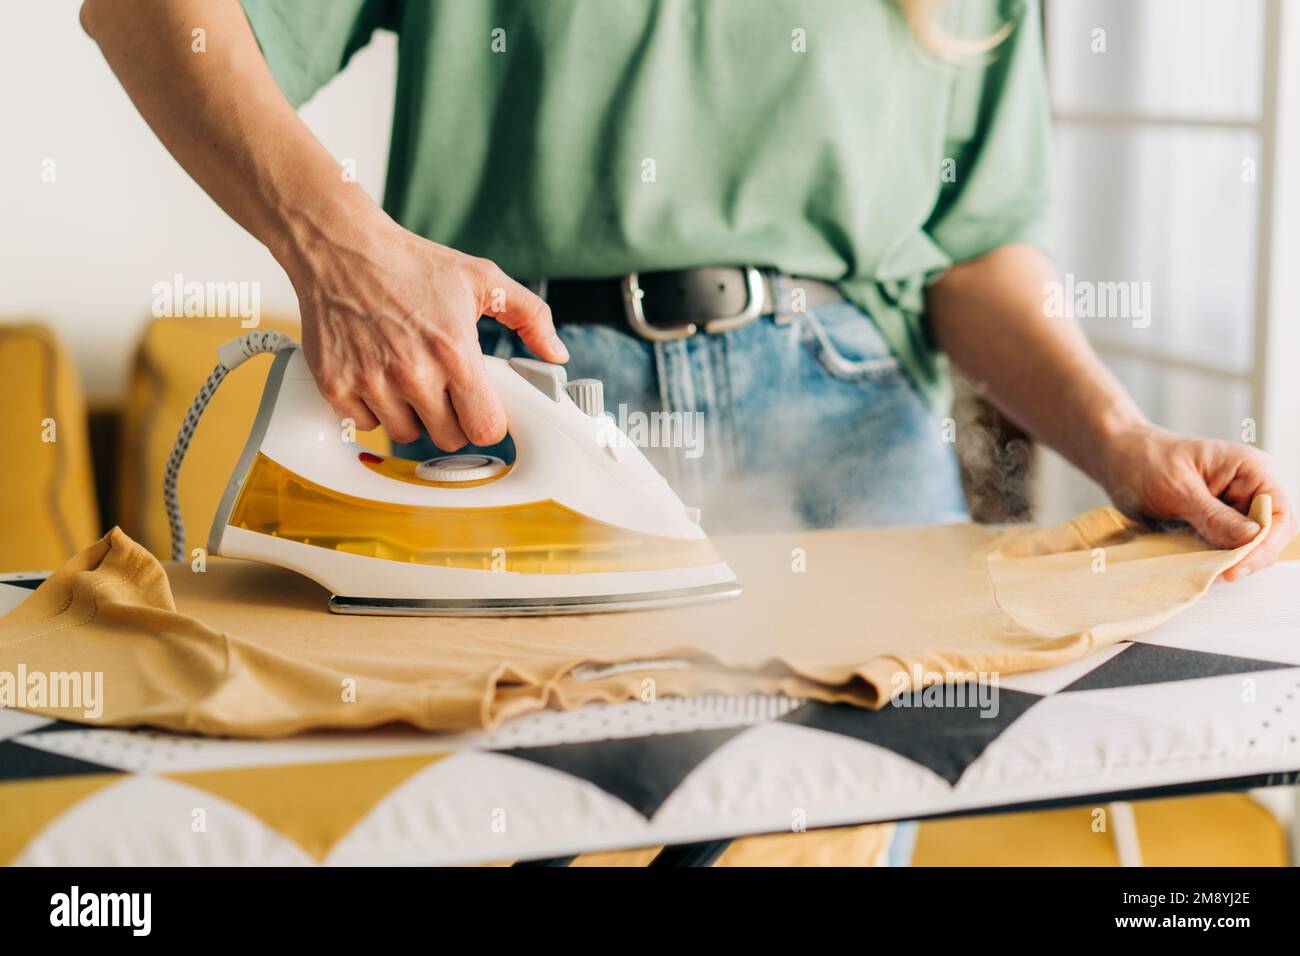 Close-up of an unrecognizable woman ironing clothes with steam on an ironing board. Stock Photo